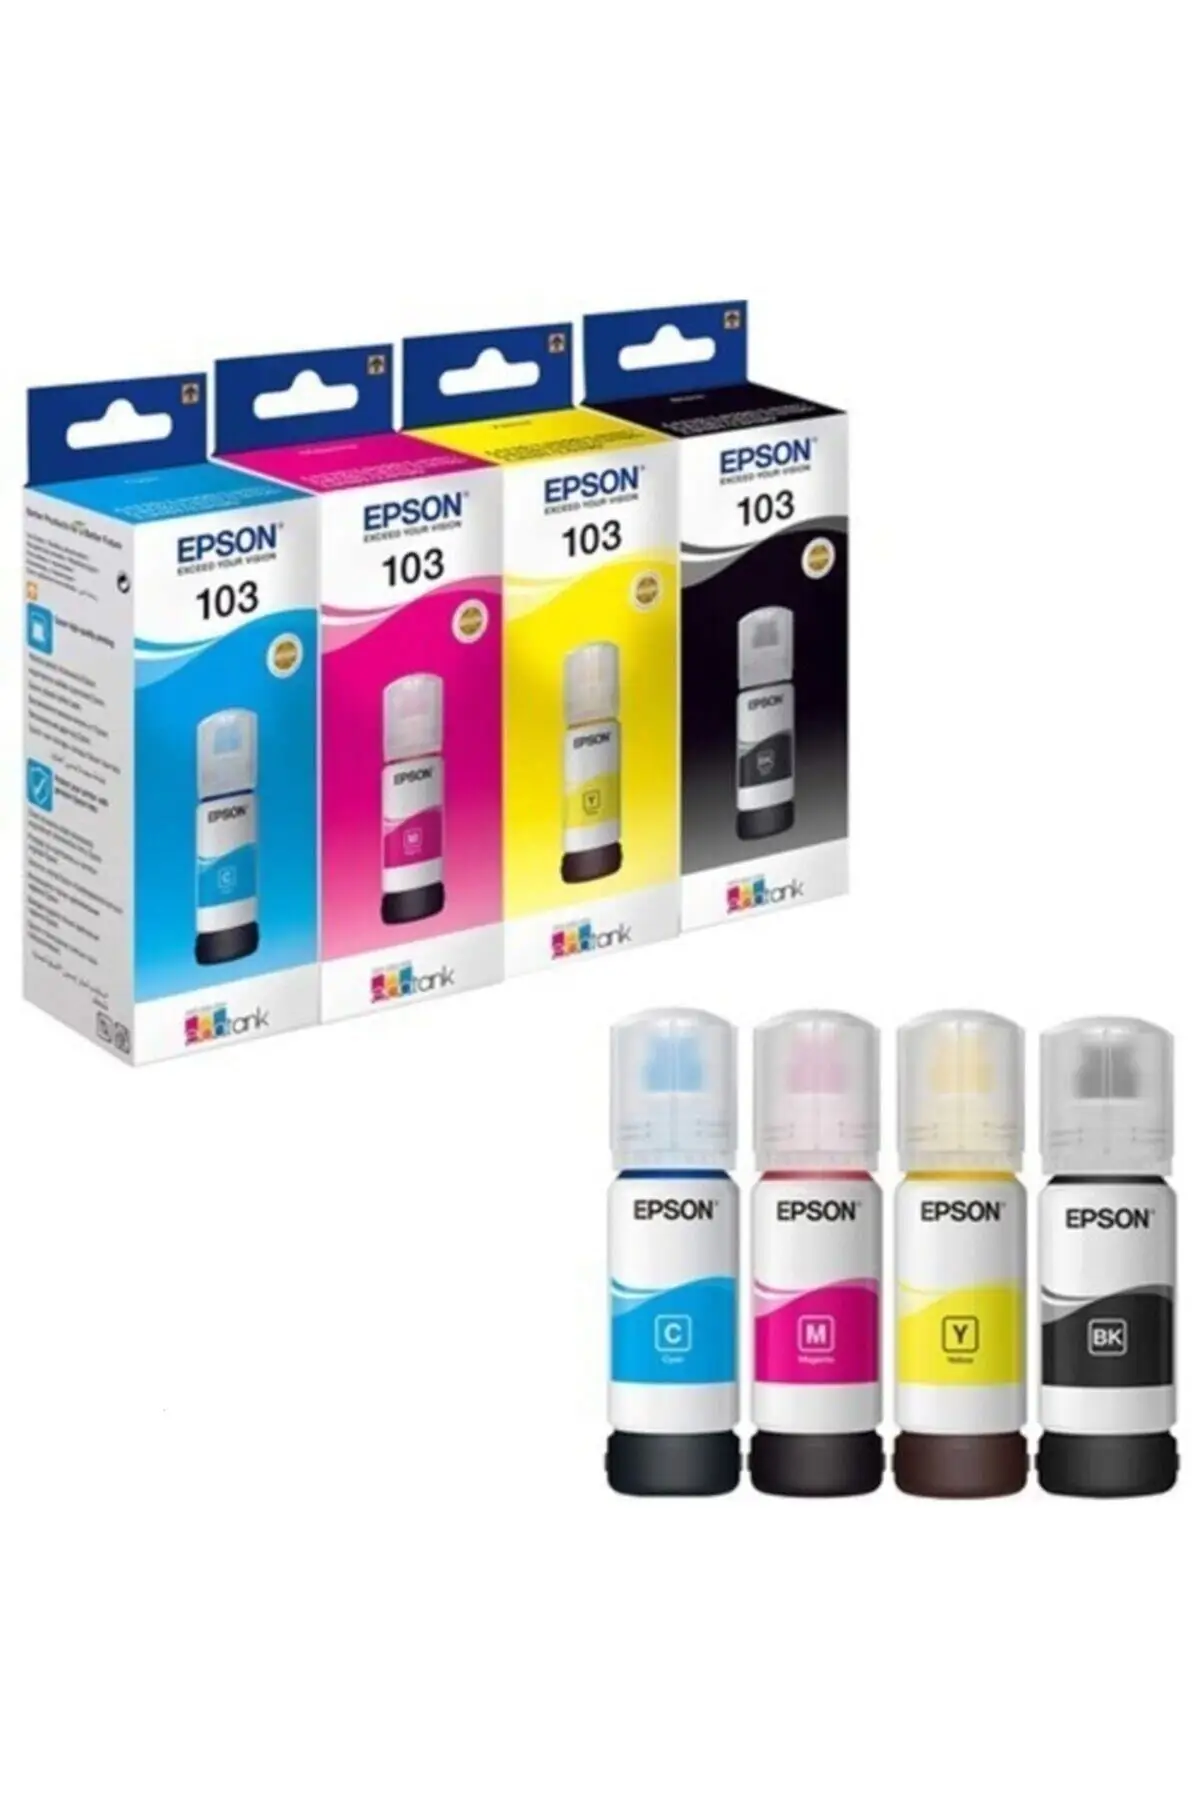 

Epson 103 Ecotank 65 Ml 4 Color Box High Print Quality, Black, Cyan, magenta and Yellow Ink Set, Advantageous Package